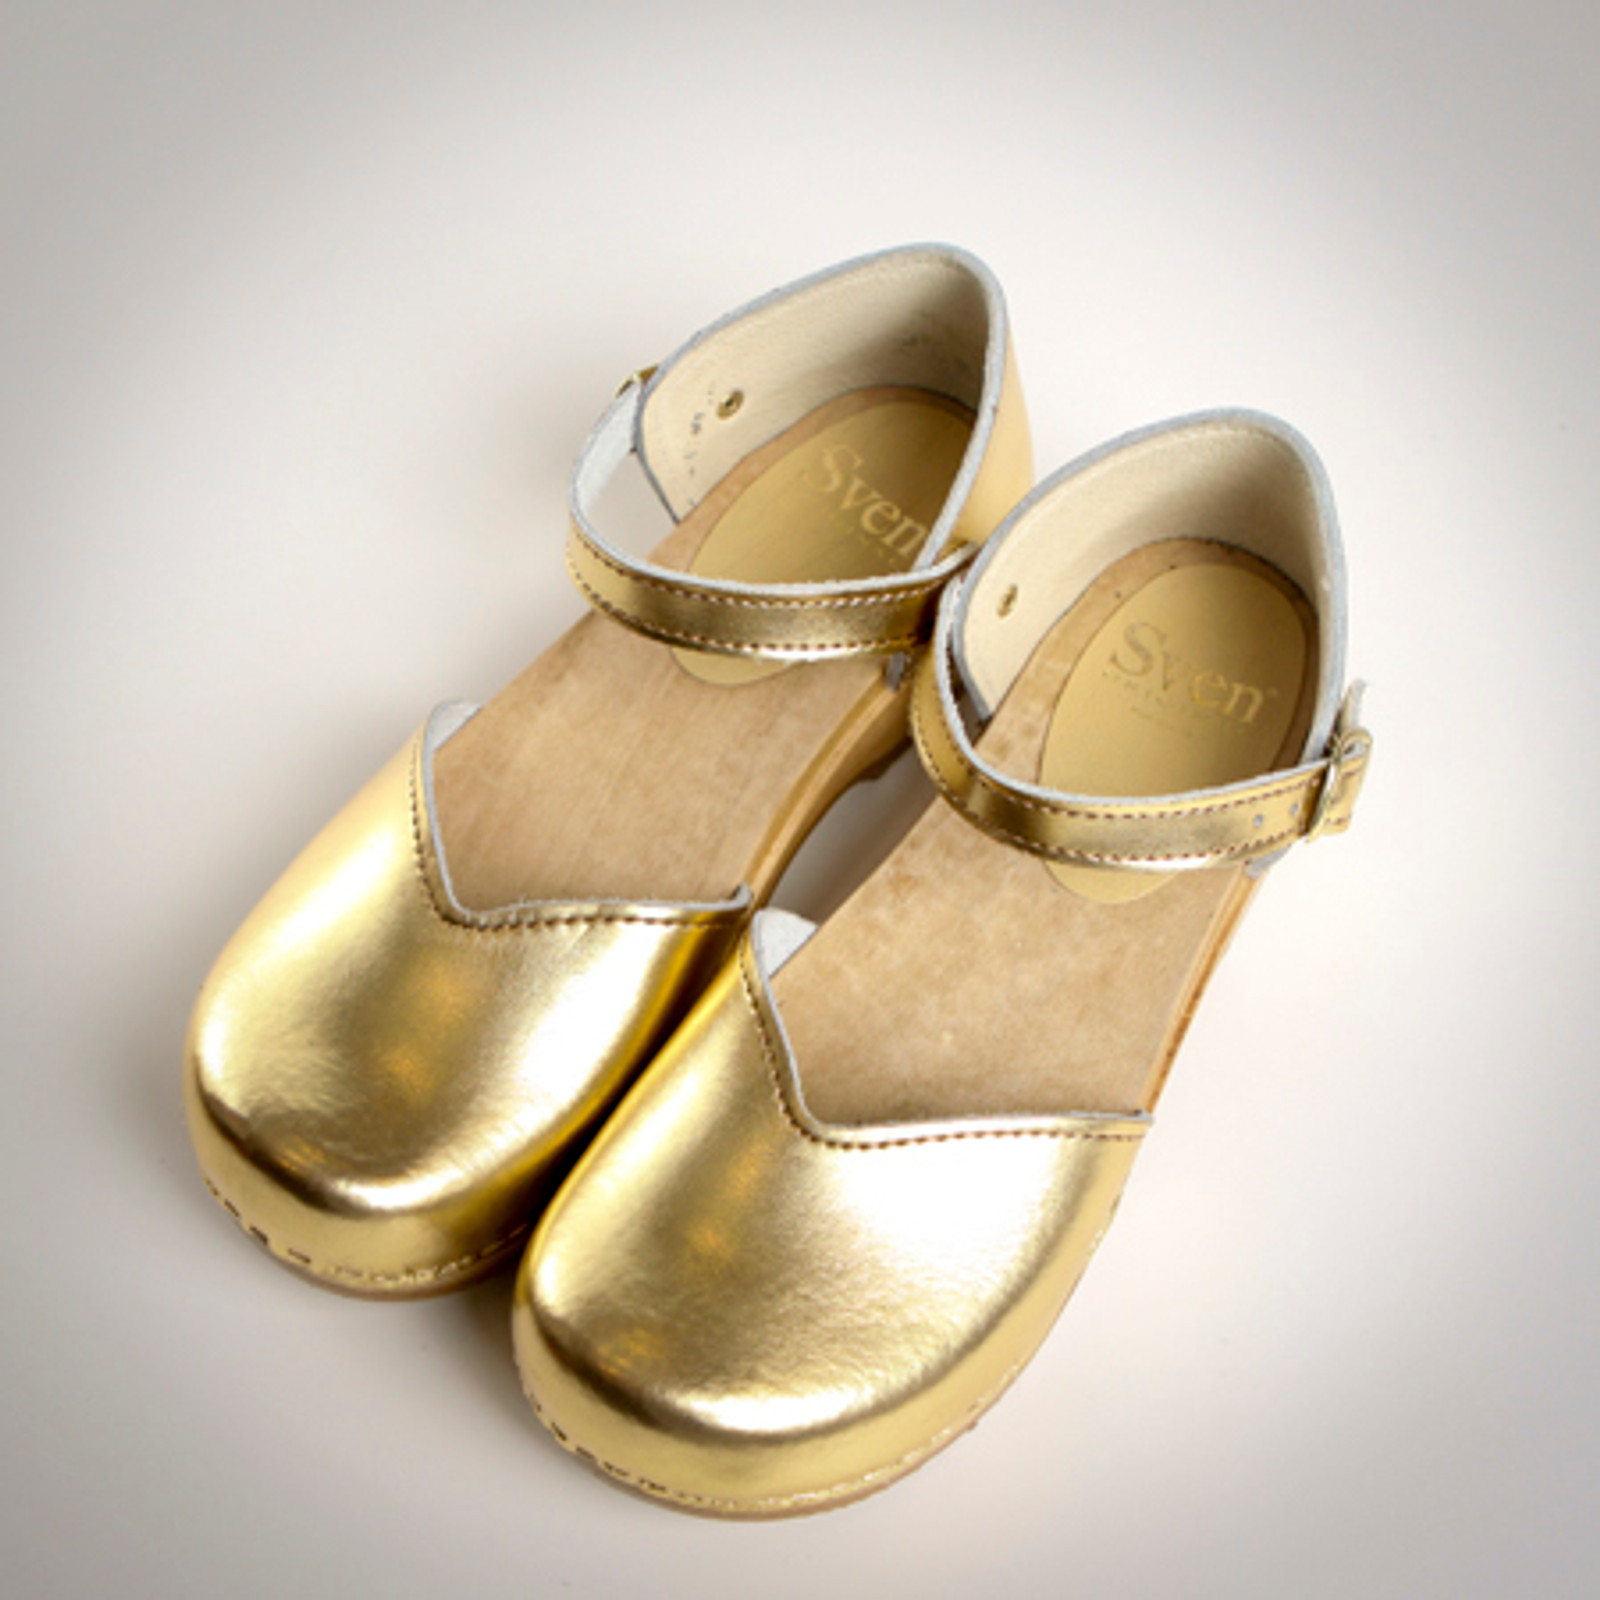 Closed Heel Clogs - Mary Jane - Bendable